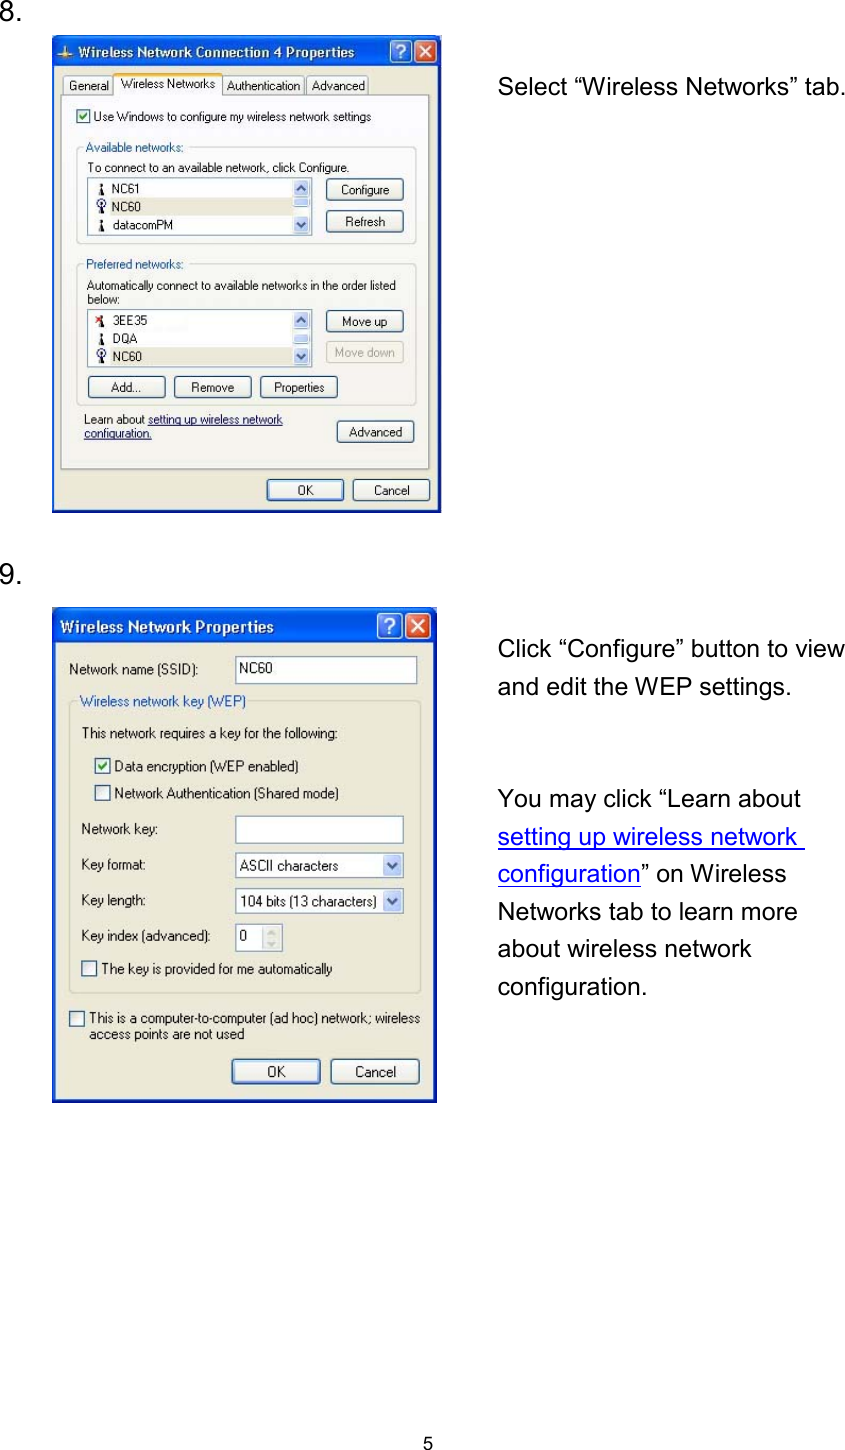  58.   Select “Wireless Networks” tab.9.   Click “Configure” button to view and edit the WEP settings. You may click “Learn about setting up wireless network configuration” on Wireless Networks tab to learn more about wireless network configuration. 